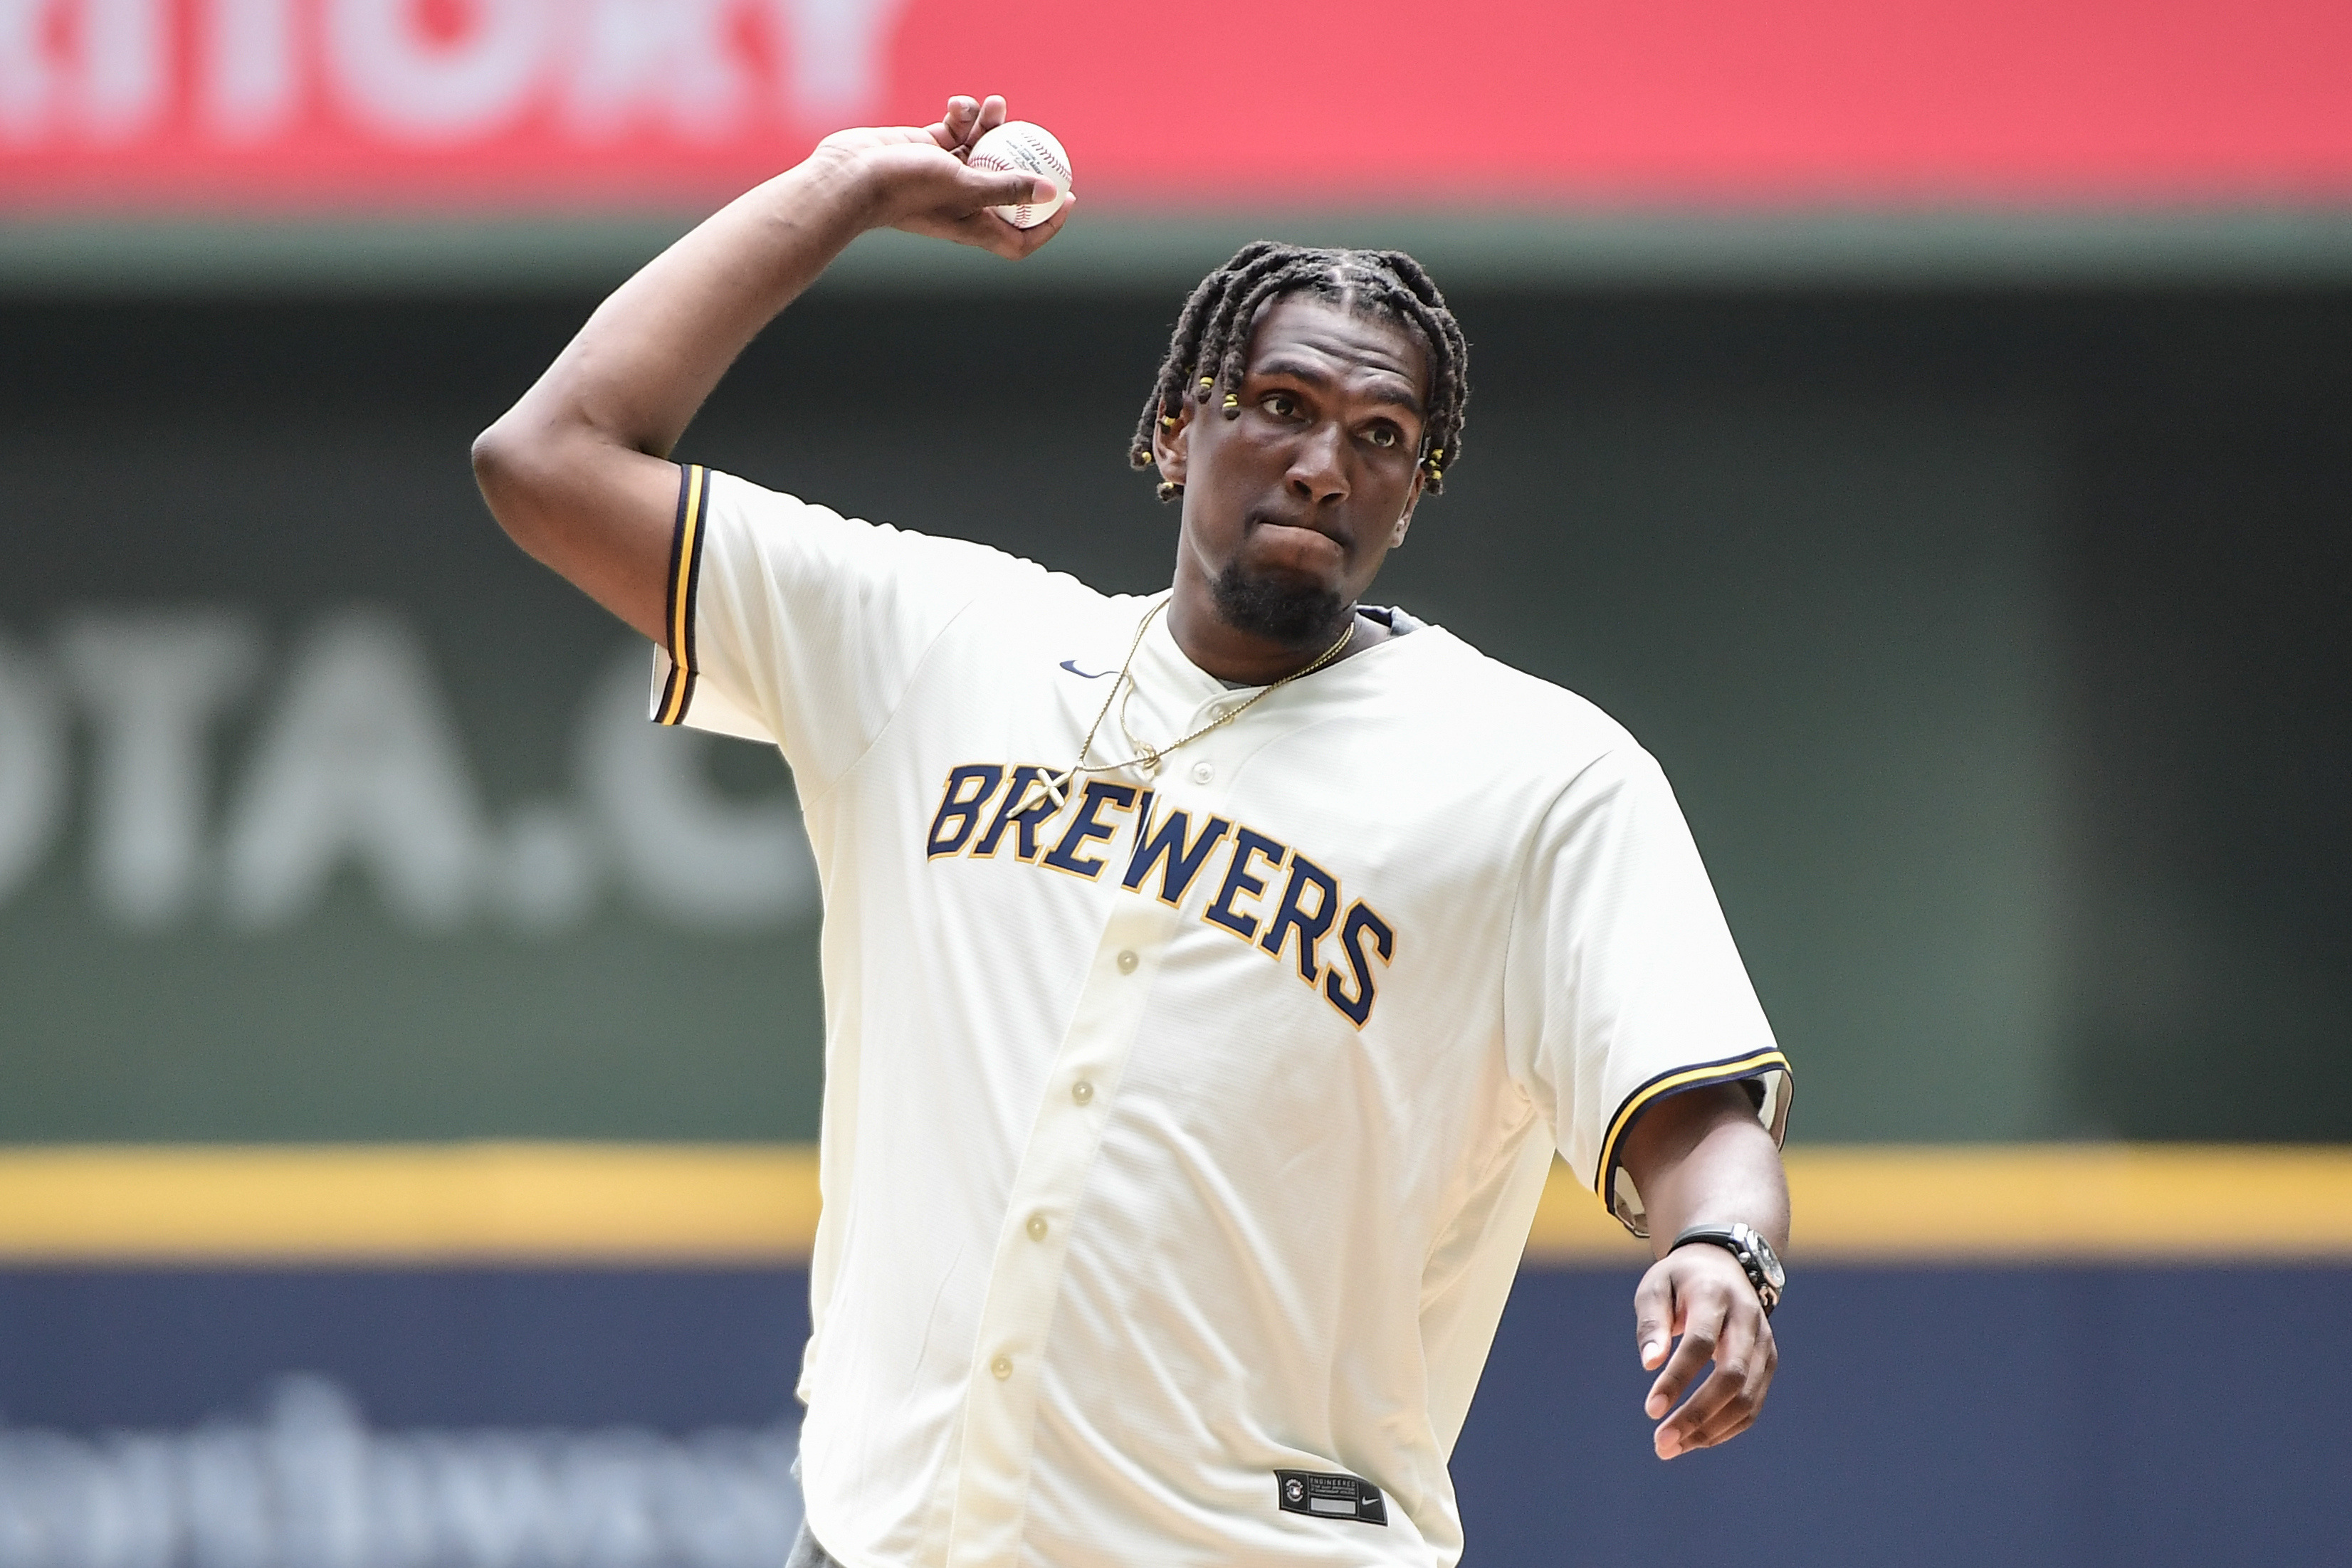 The Milwaukee Brewers score two runs on a pair of fielder's choice